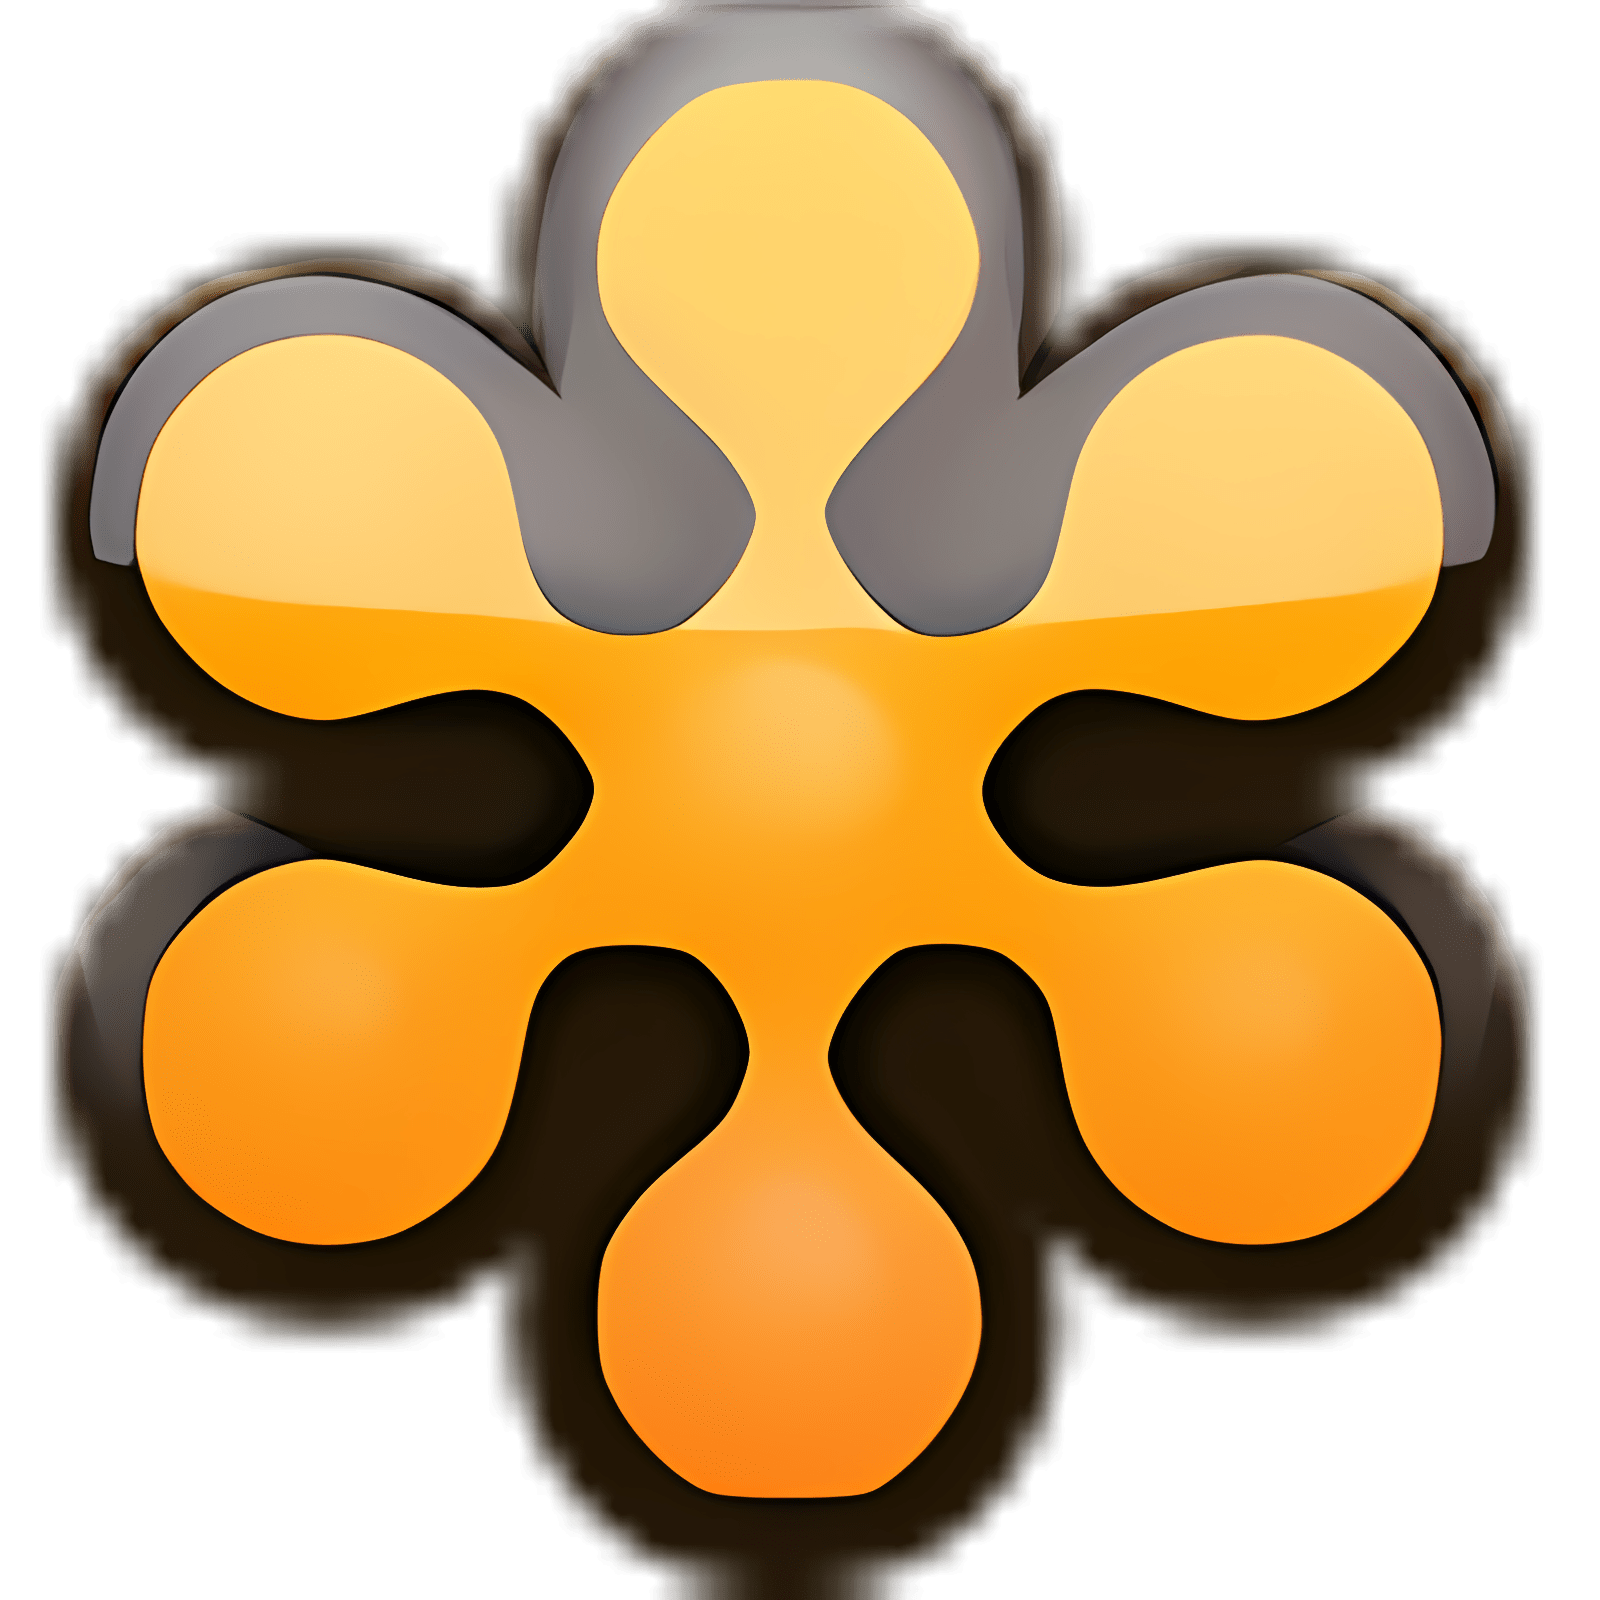 Download GoToMeeting - Video Conferencing Install Latest App downloader